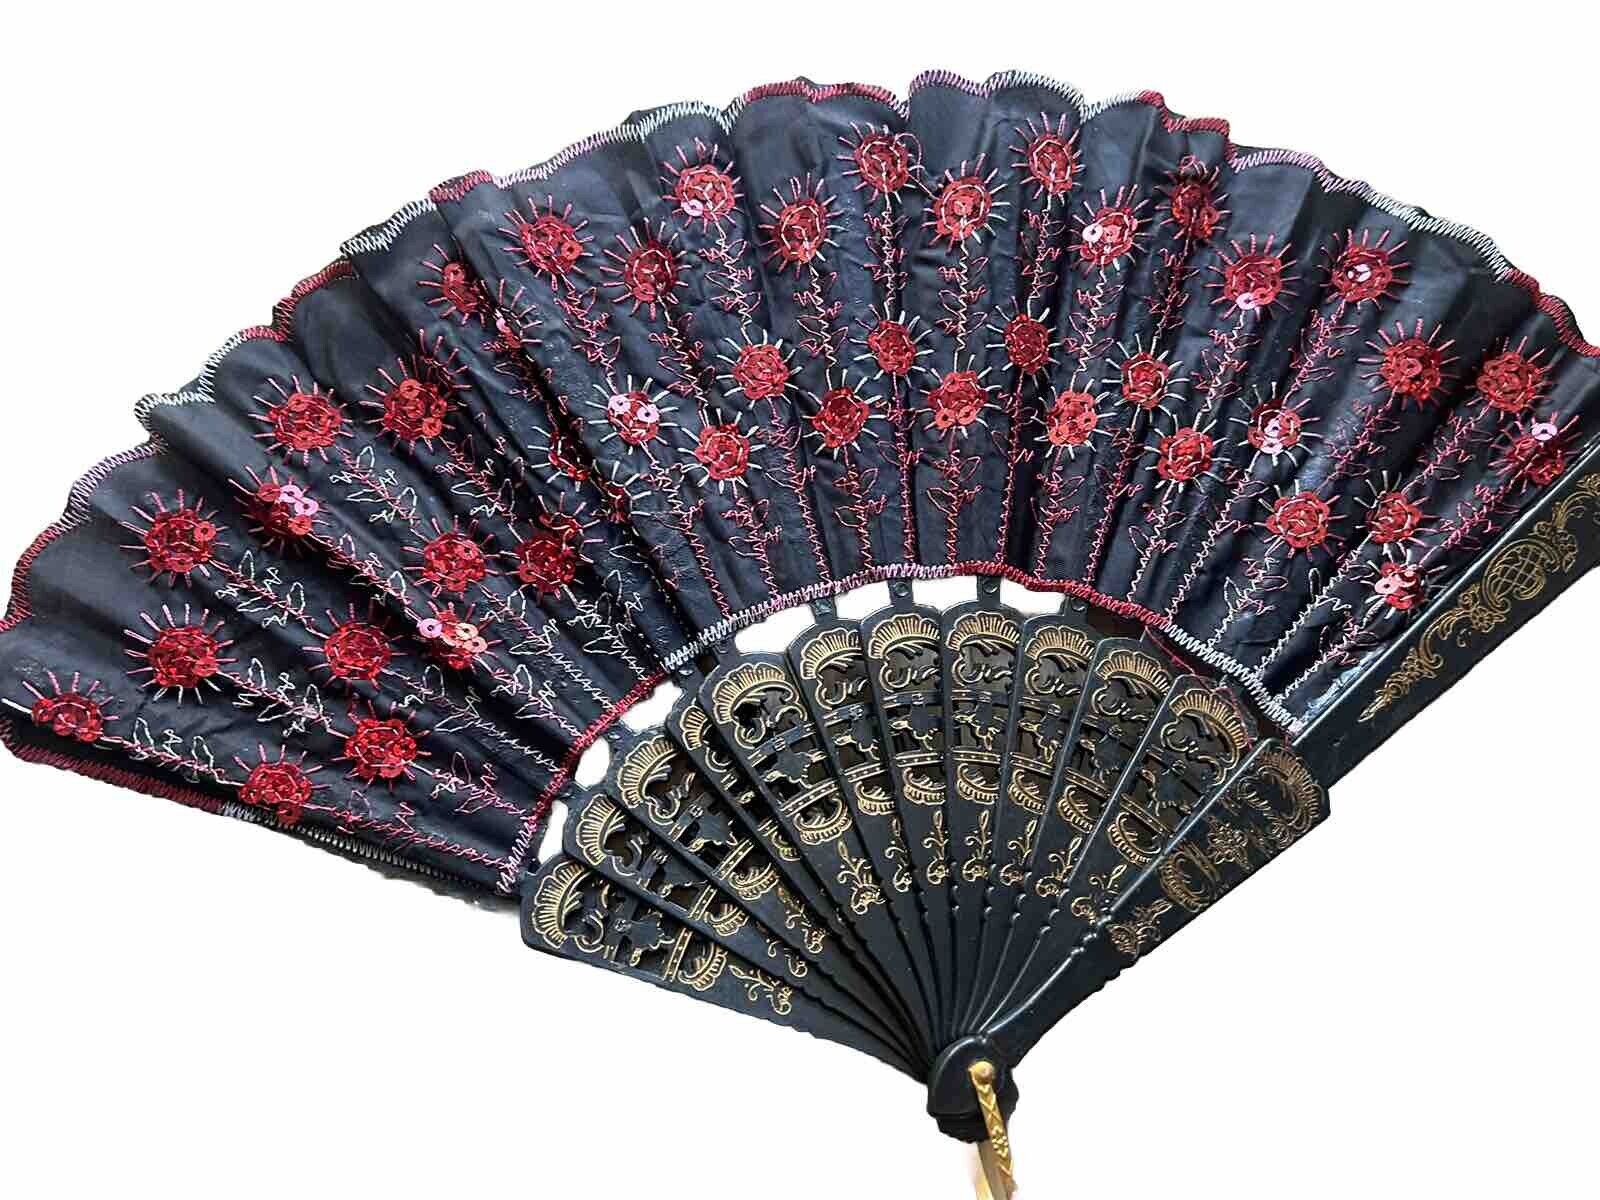 Chinese Folding Fan Black Fabric With Red Floral Stitching